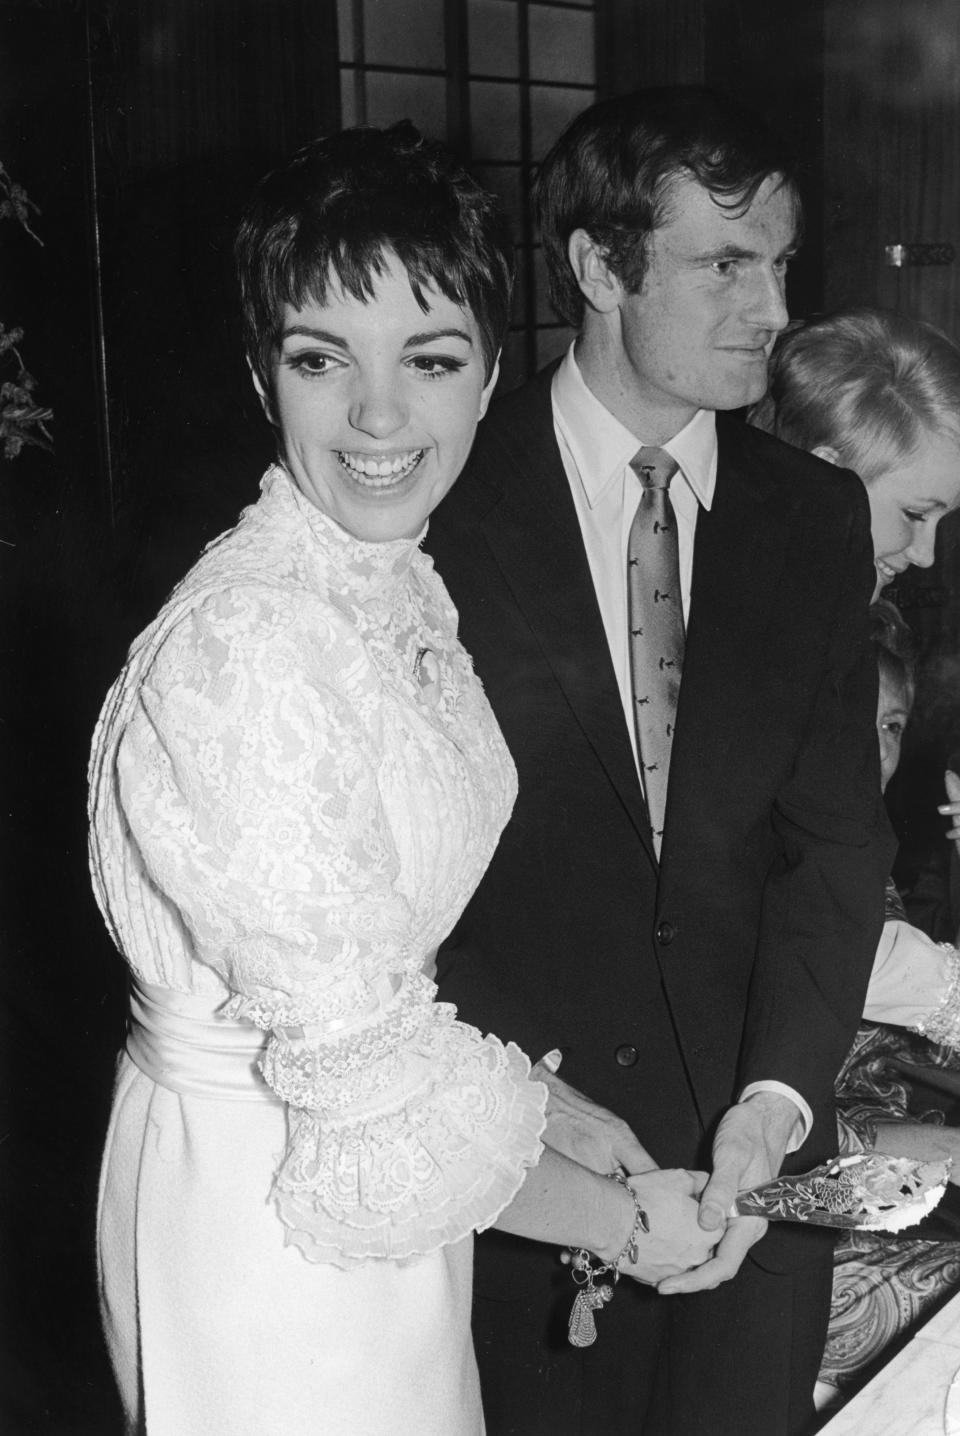 Liza Minnelli, wearing a white lace bridal gown, smiles as she cuts her wedding cake with her husband, Peter Allen.